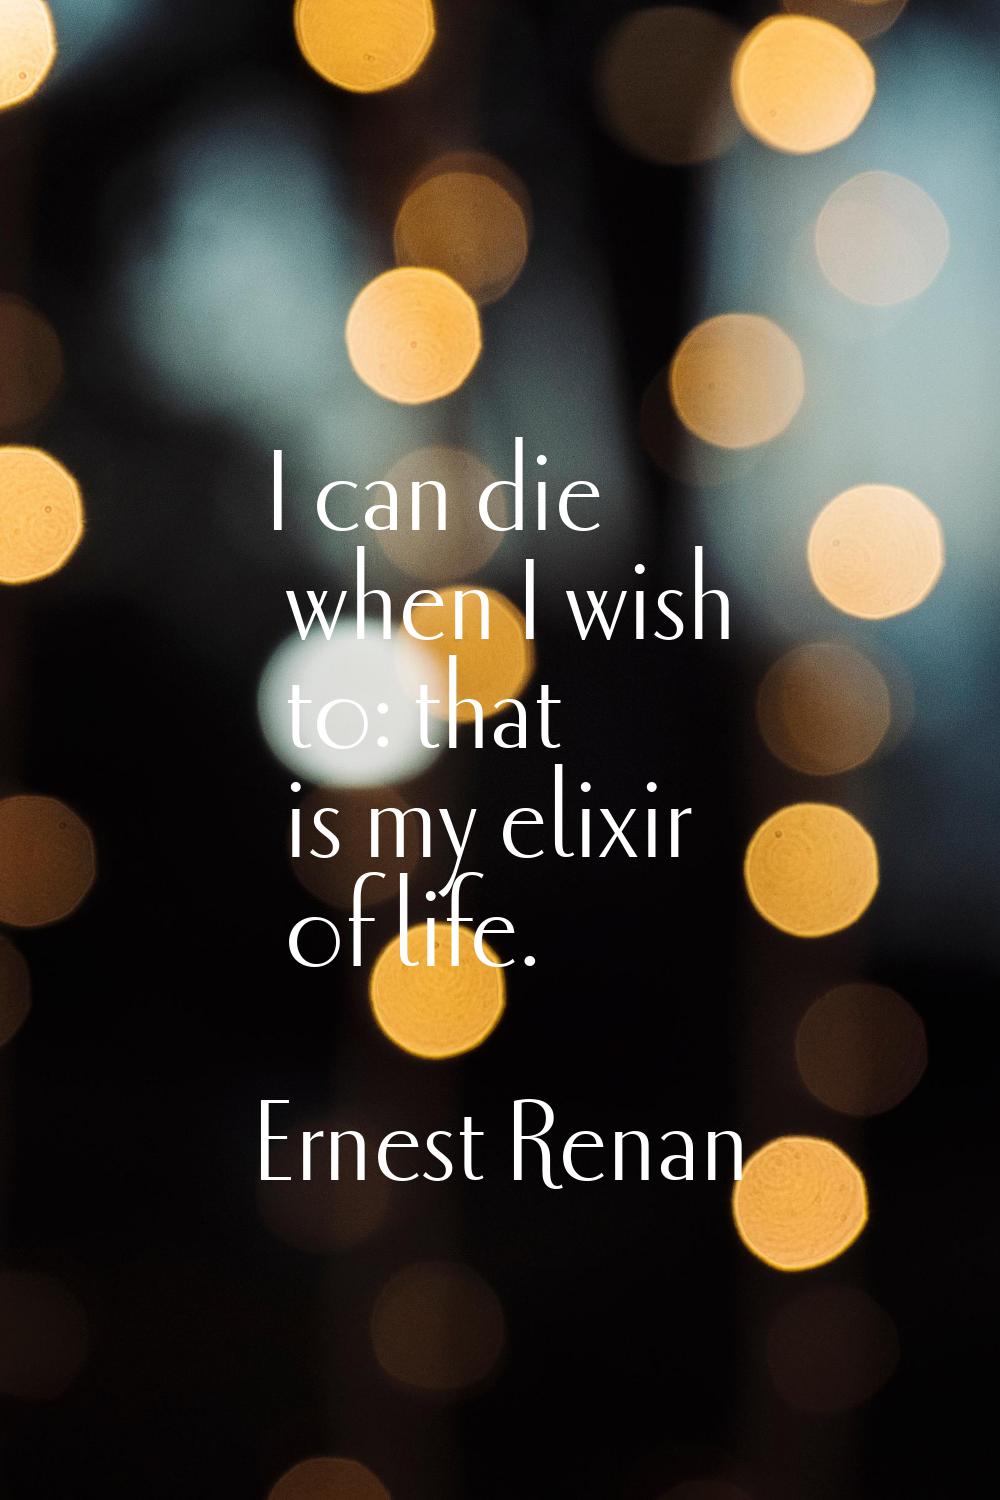 I can die when I wish to: that is my elixir of life.